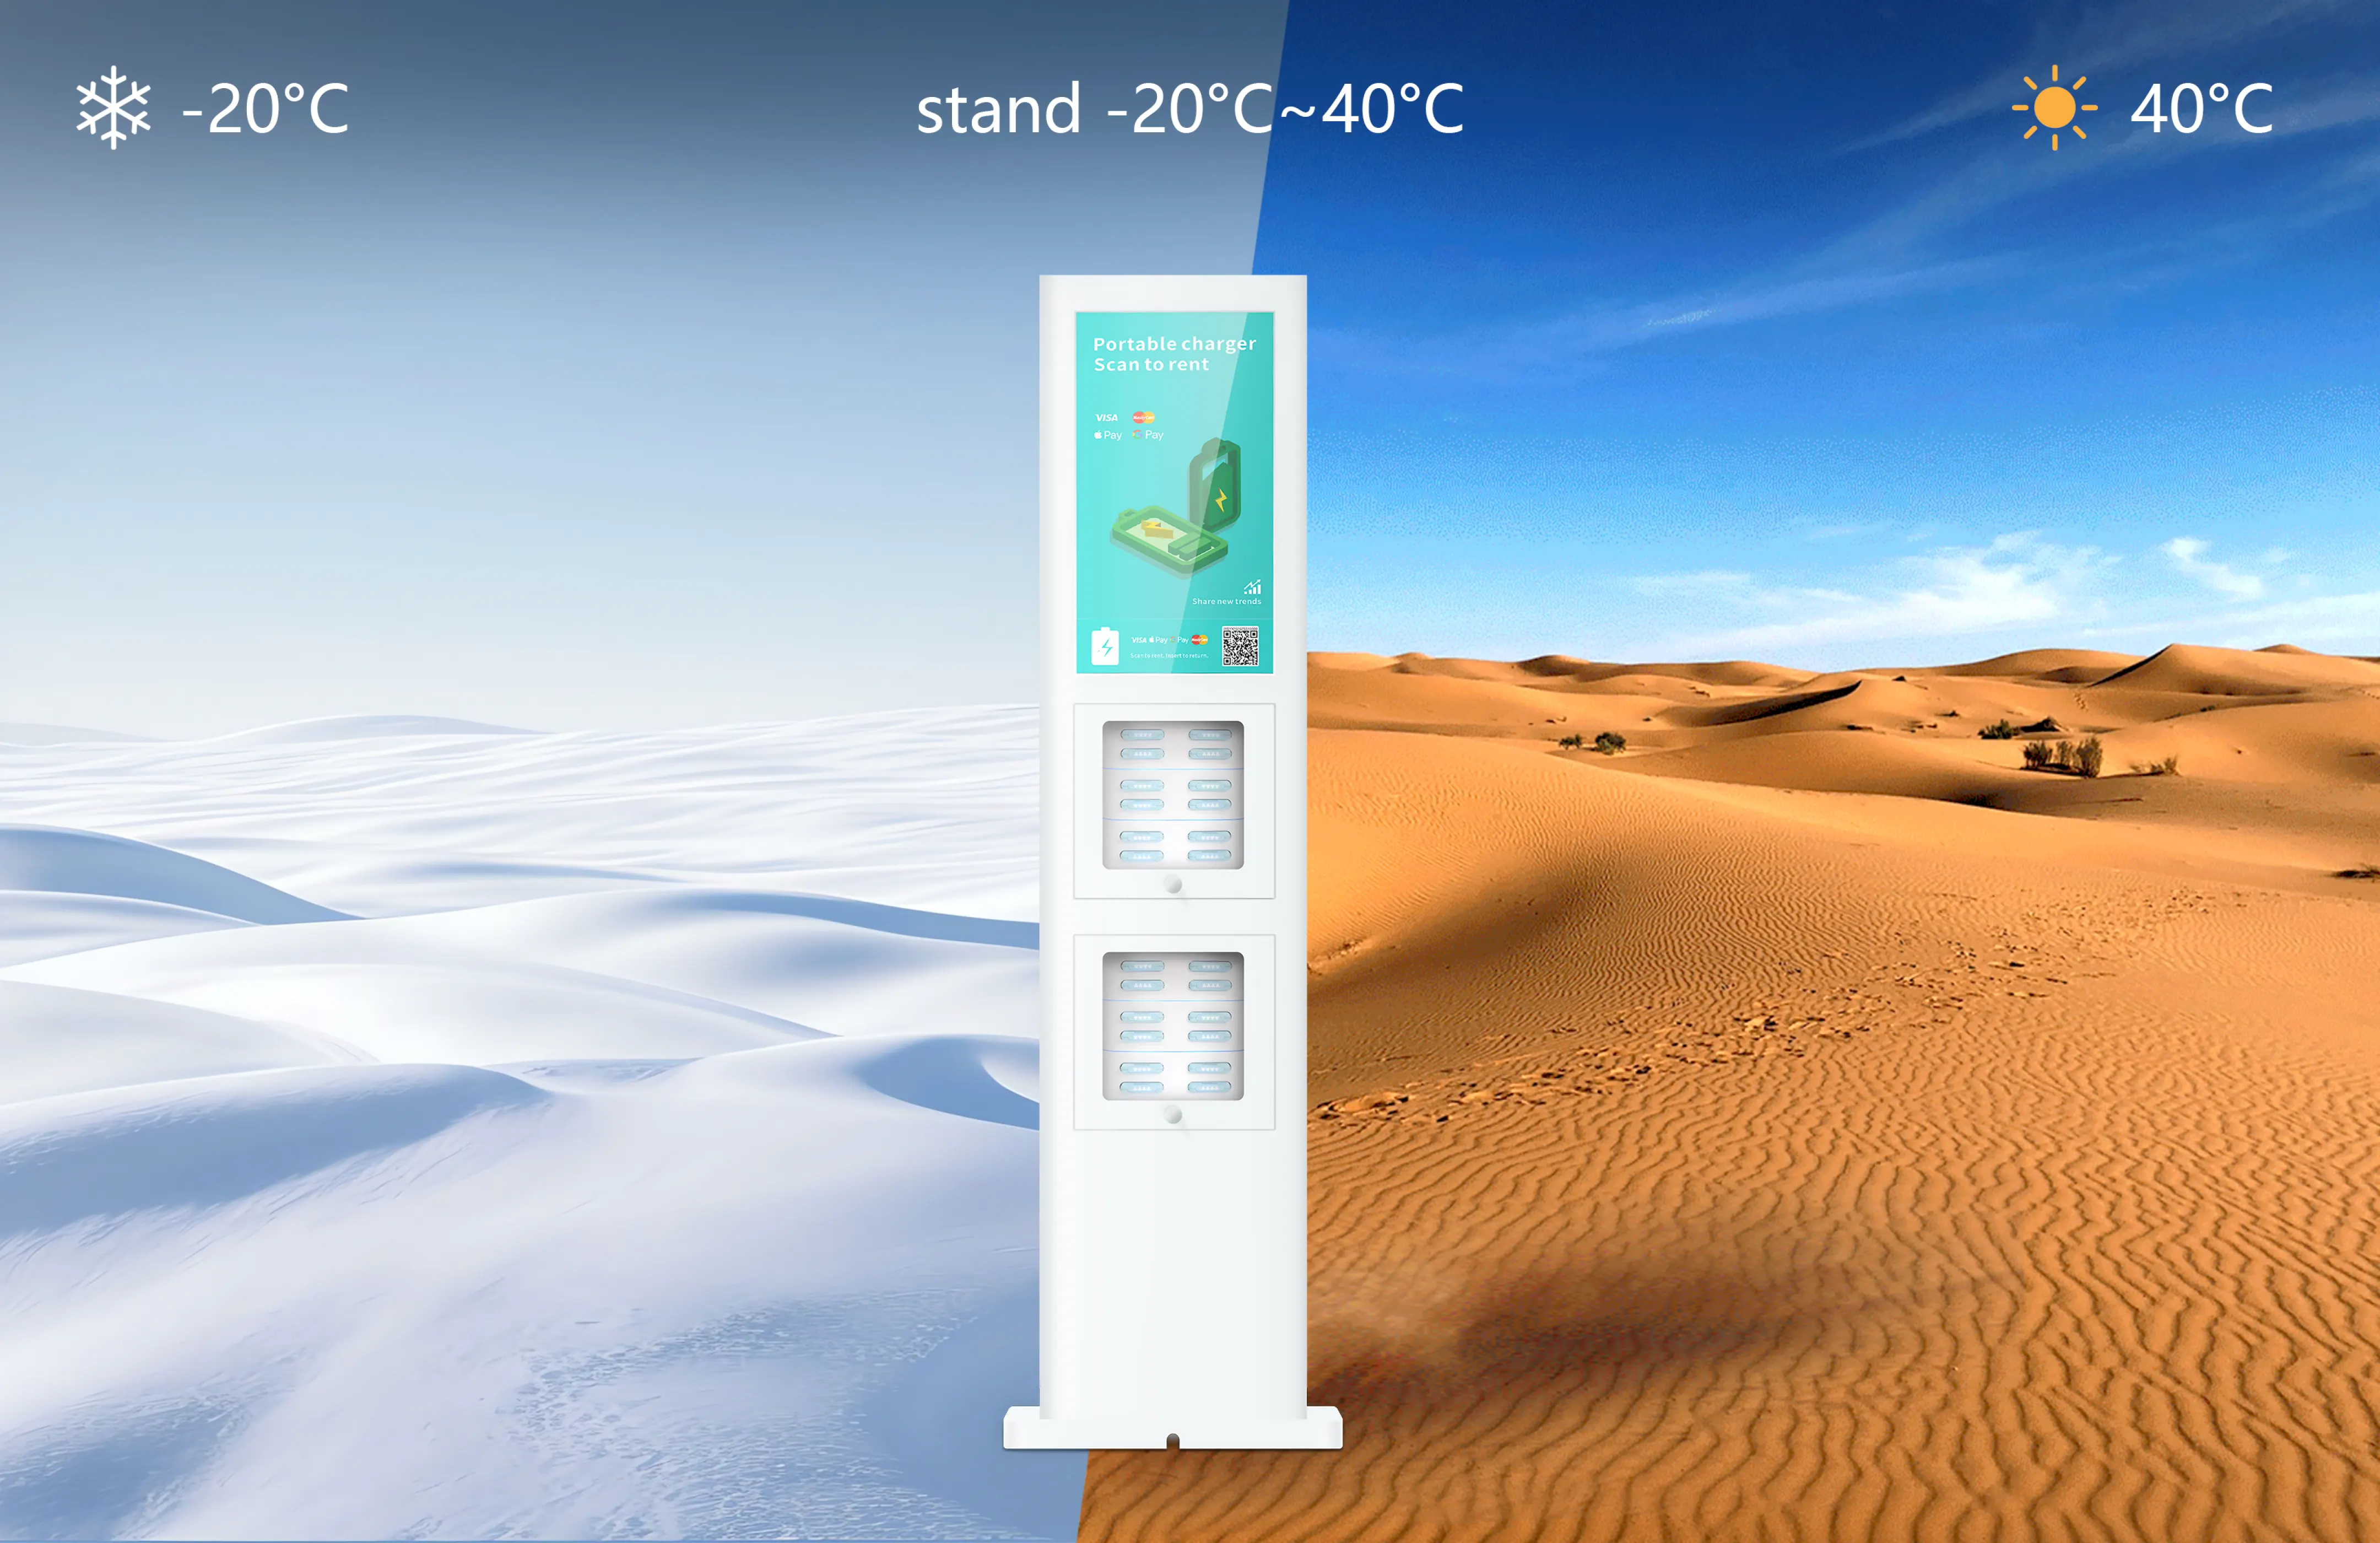 outdoor power bank mobile kiosk stands extreme temperature